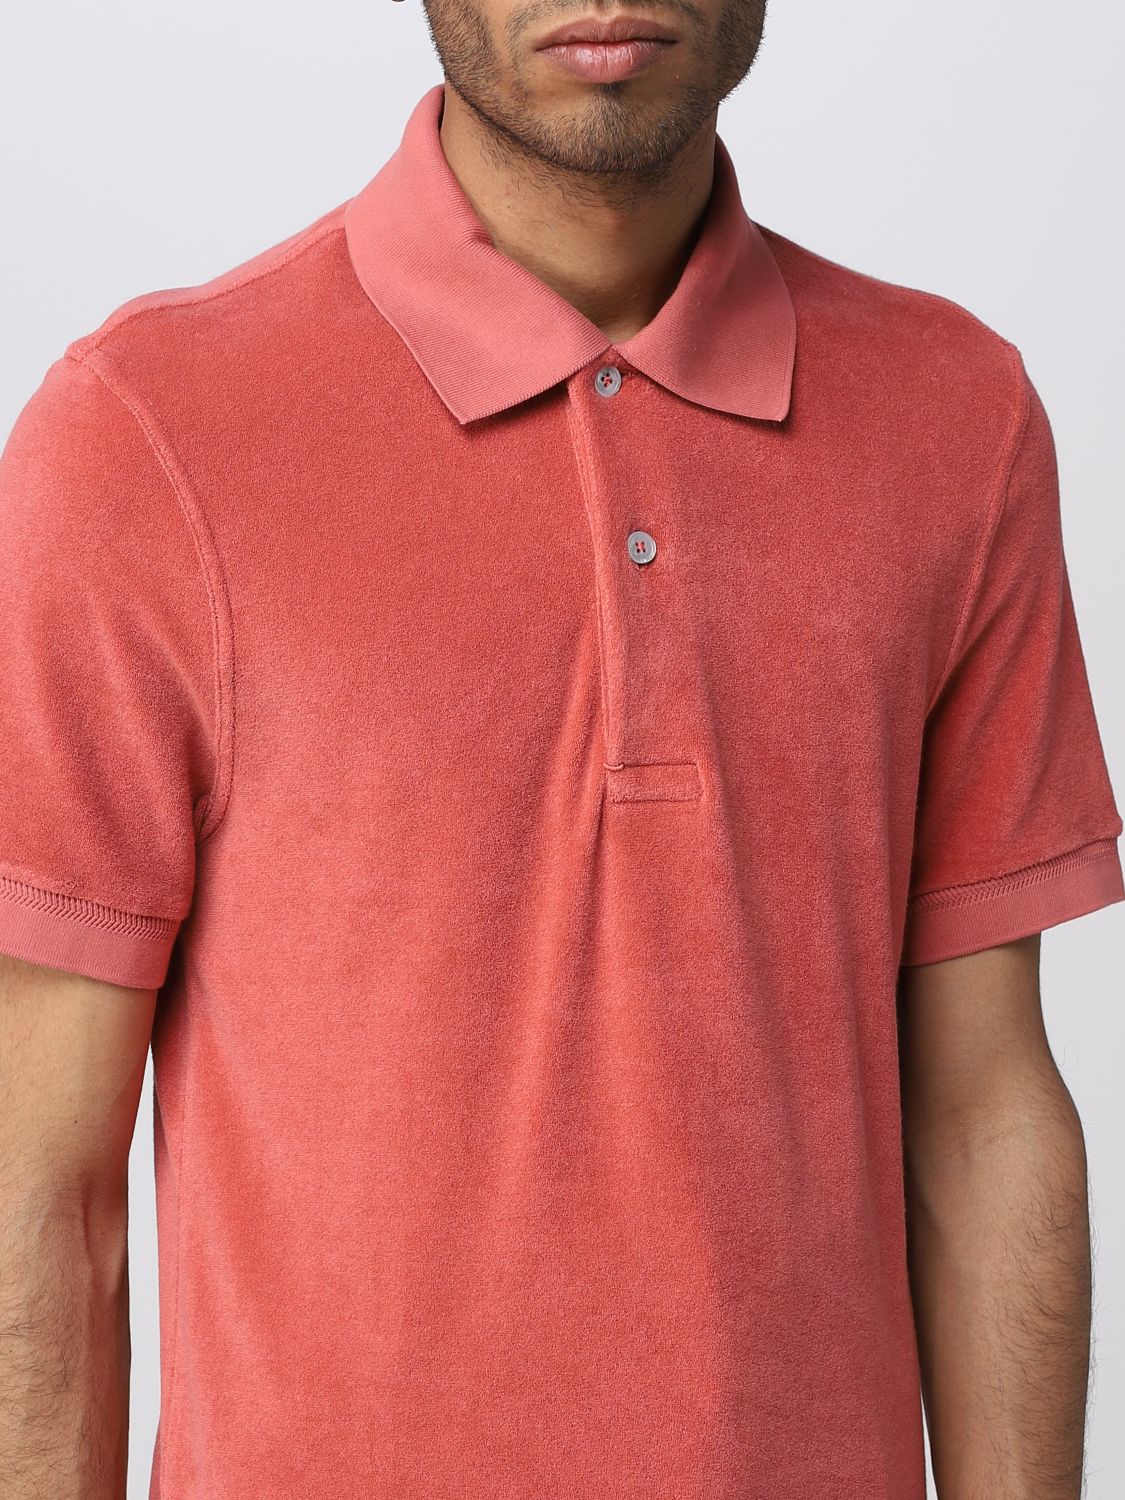 TOM FORD: polo shirt for man - Pink | Tom Ford polo shirt JPS003JMC010S23  online on 